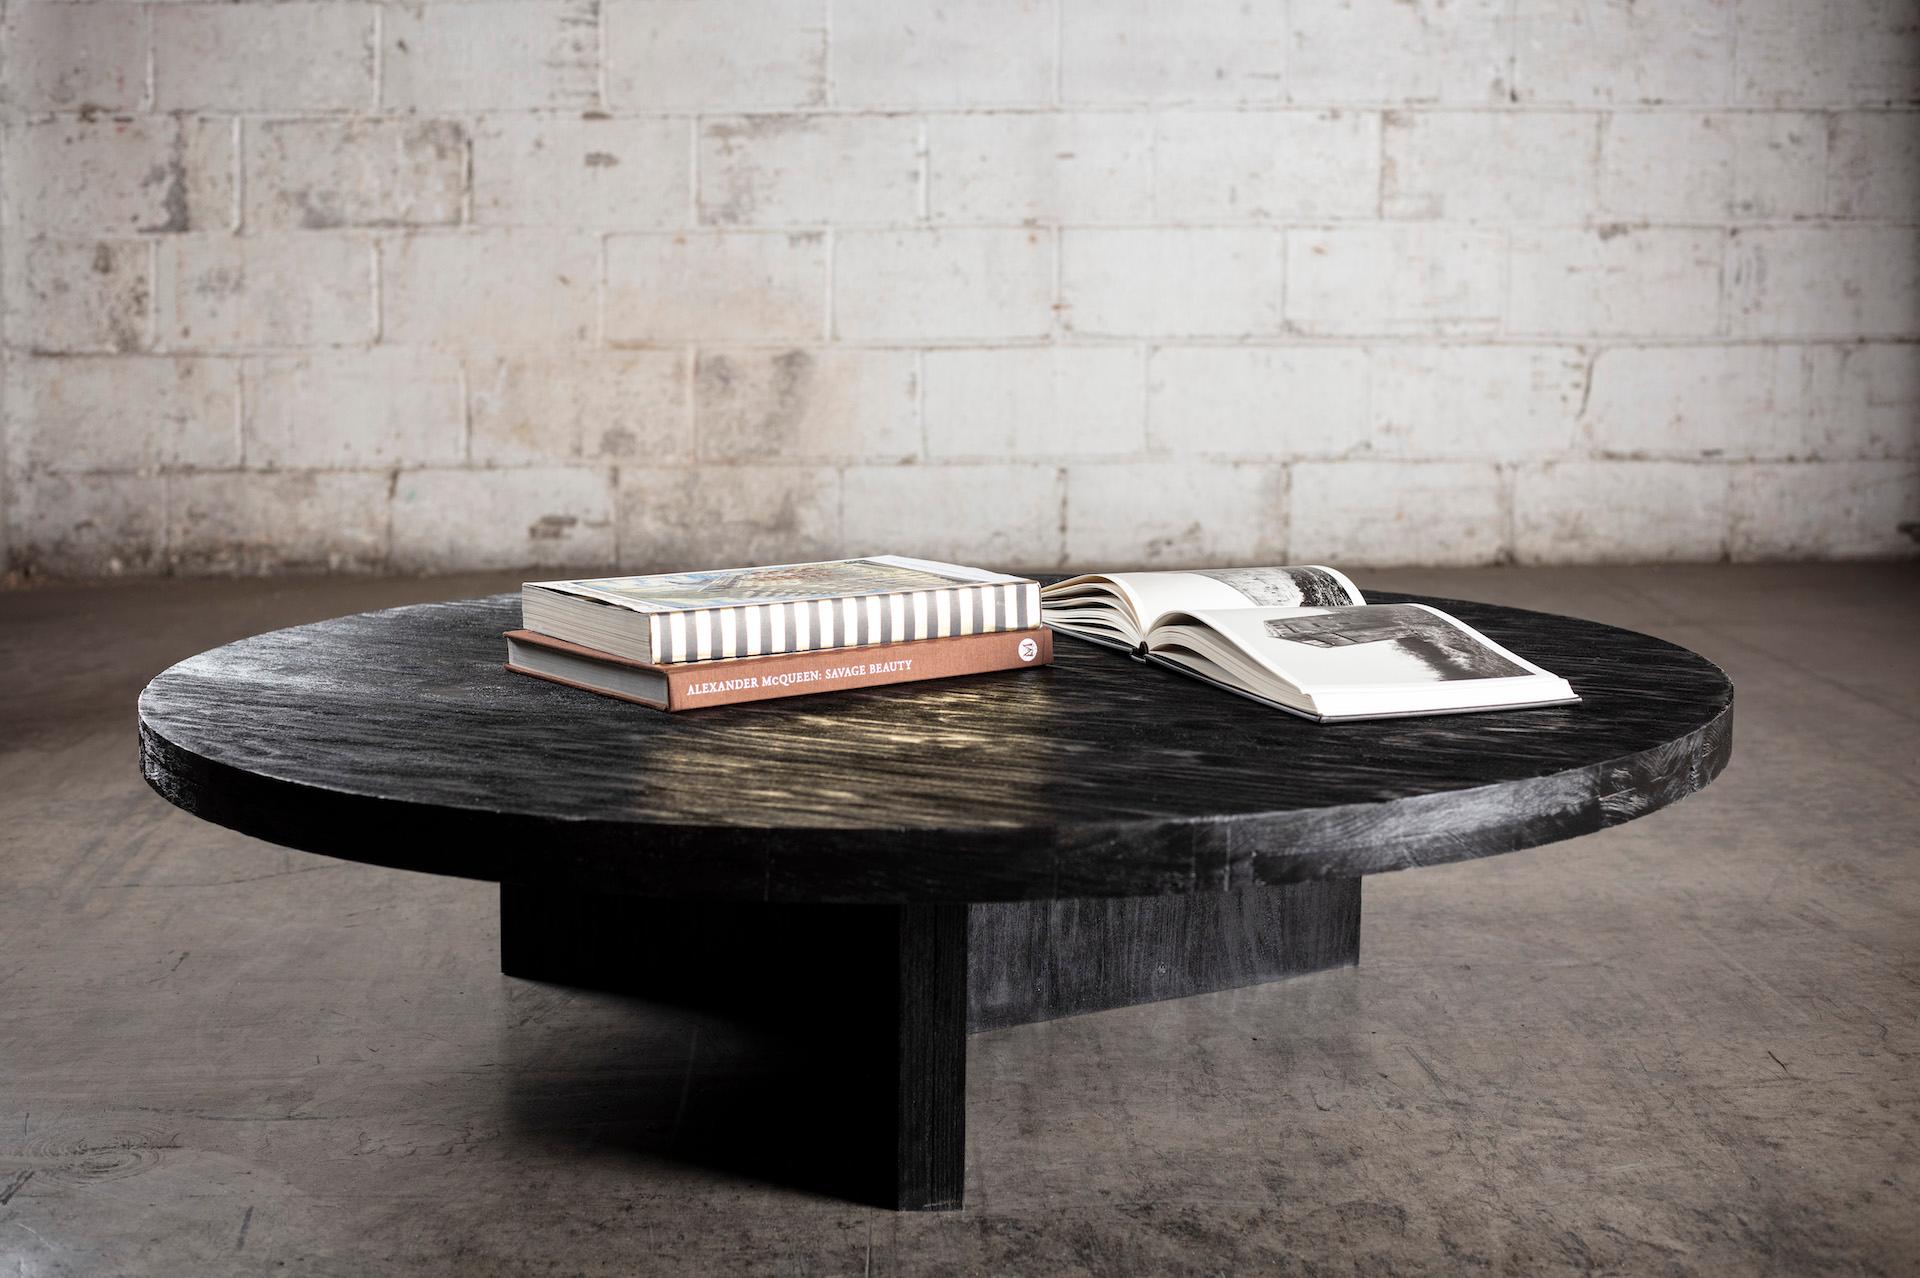 This solid wood coffee table is handcrafted out of oak solid wood that retains its natural character.